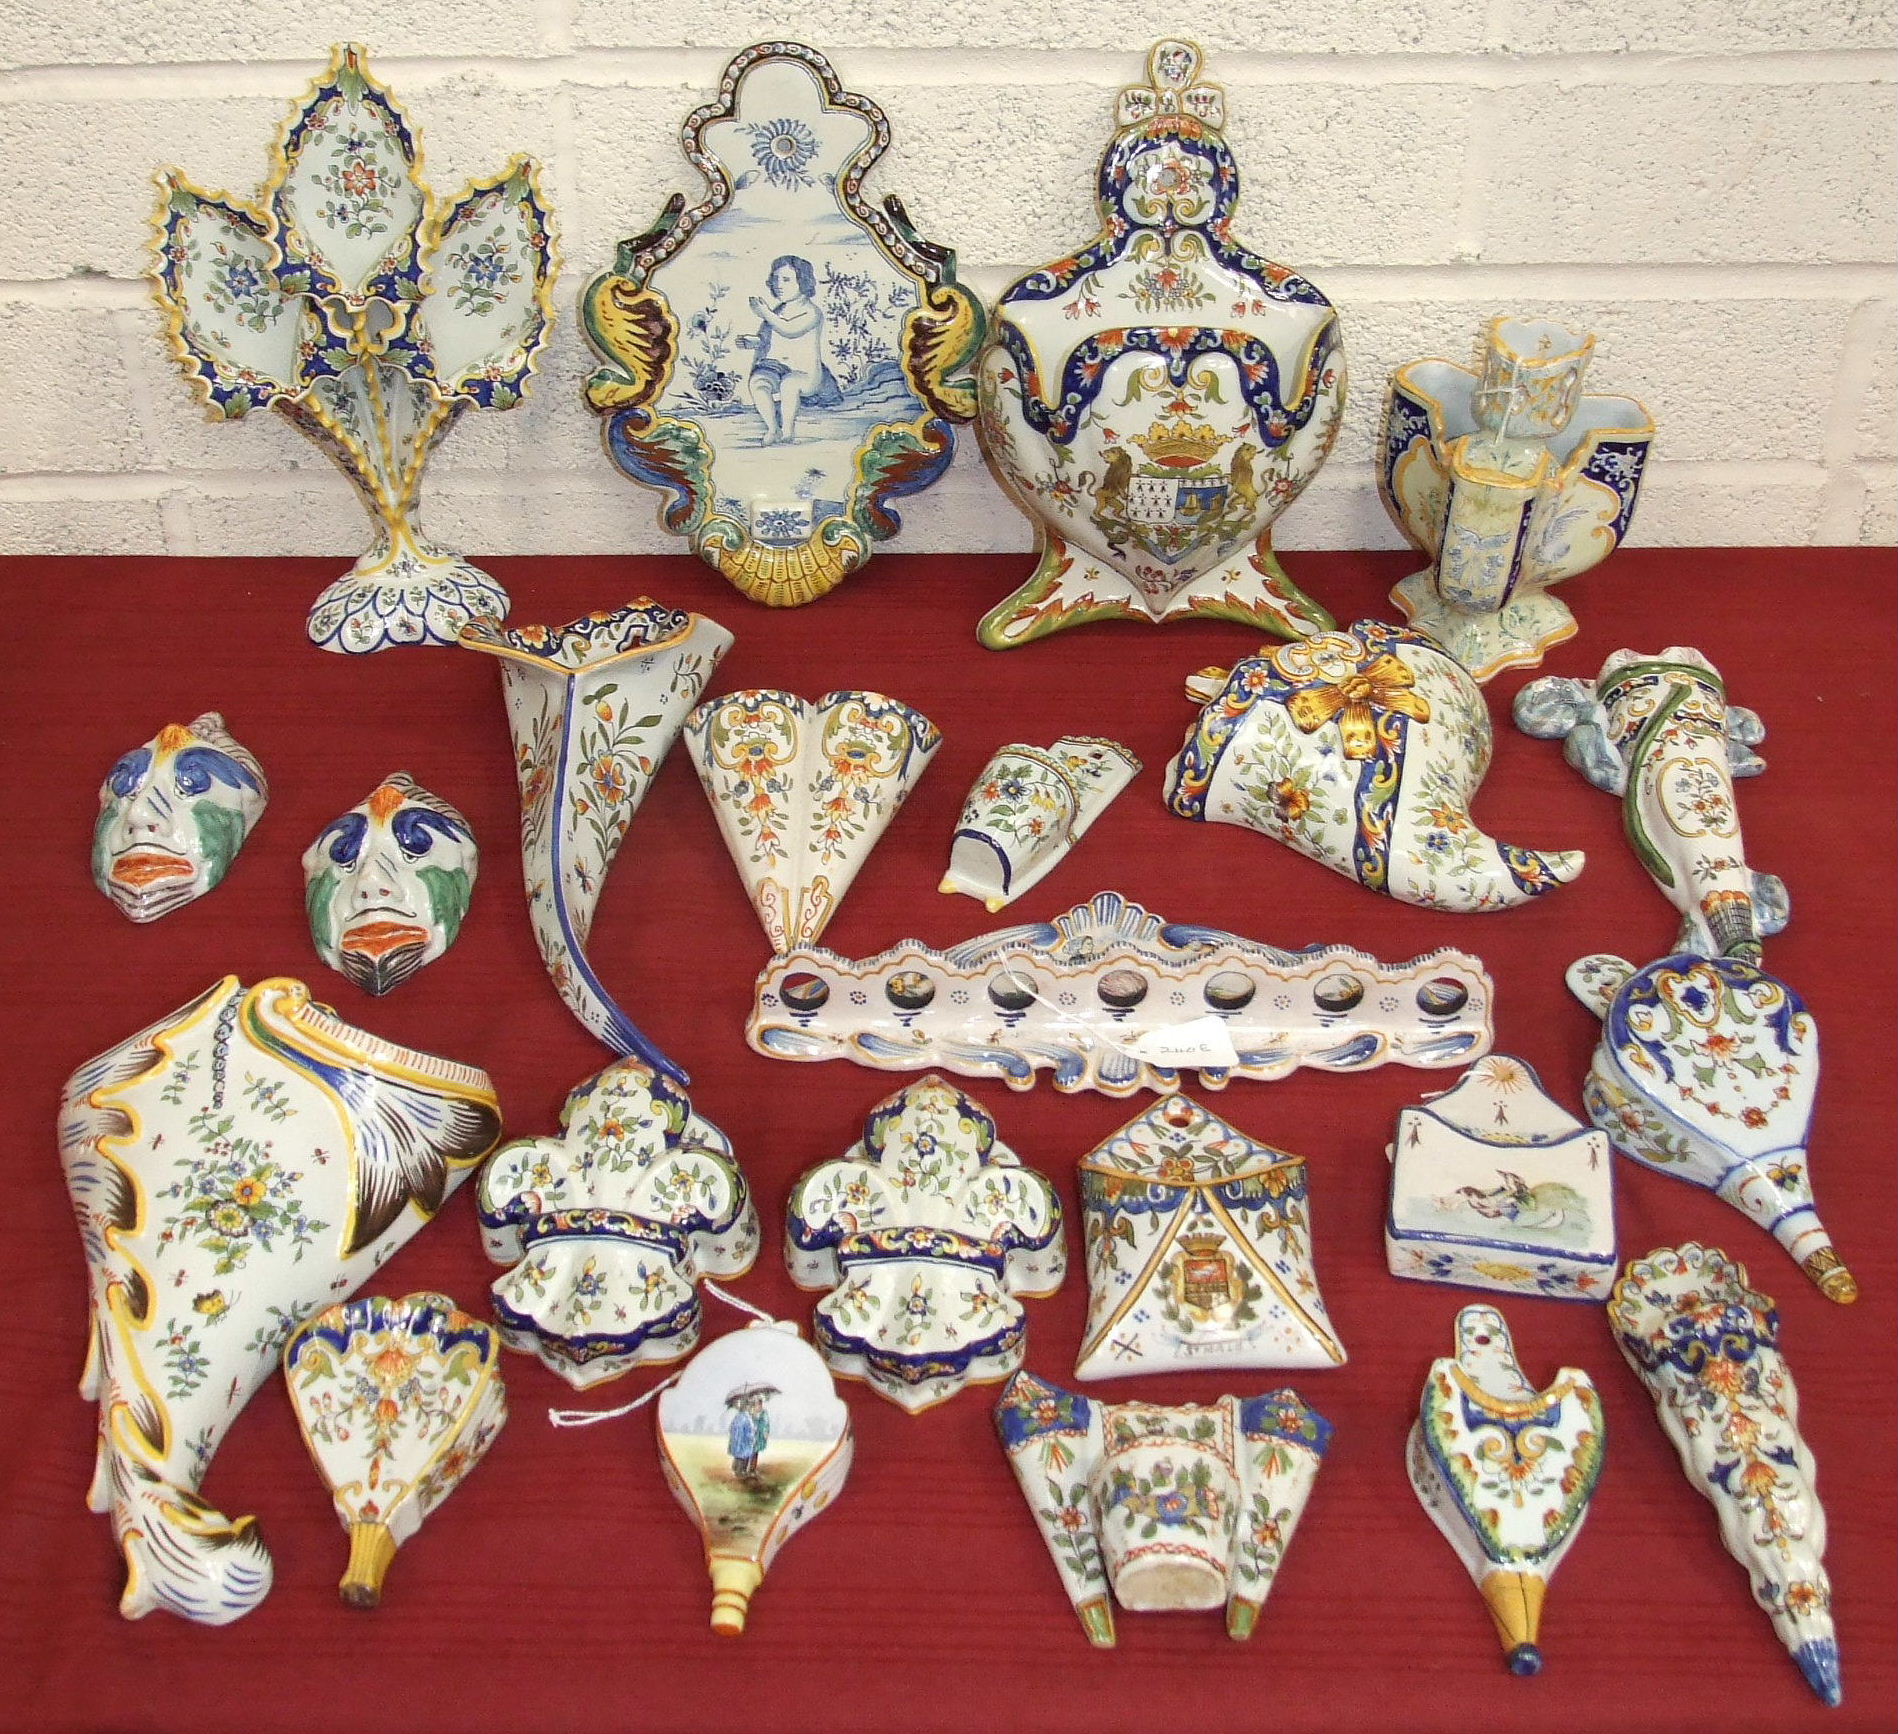 A collection of thirty-two French Faience wall pockets, plaques, fan-shaped flower holders and a